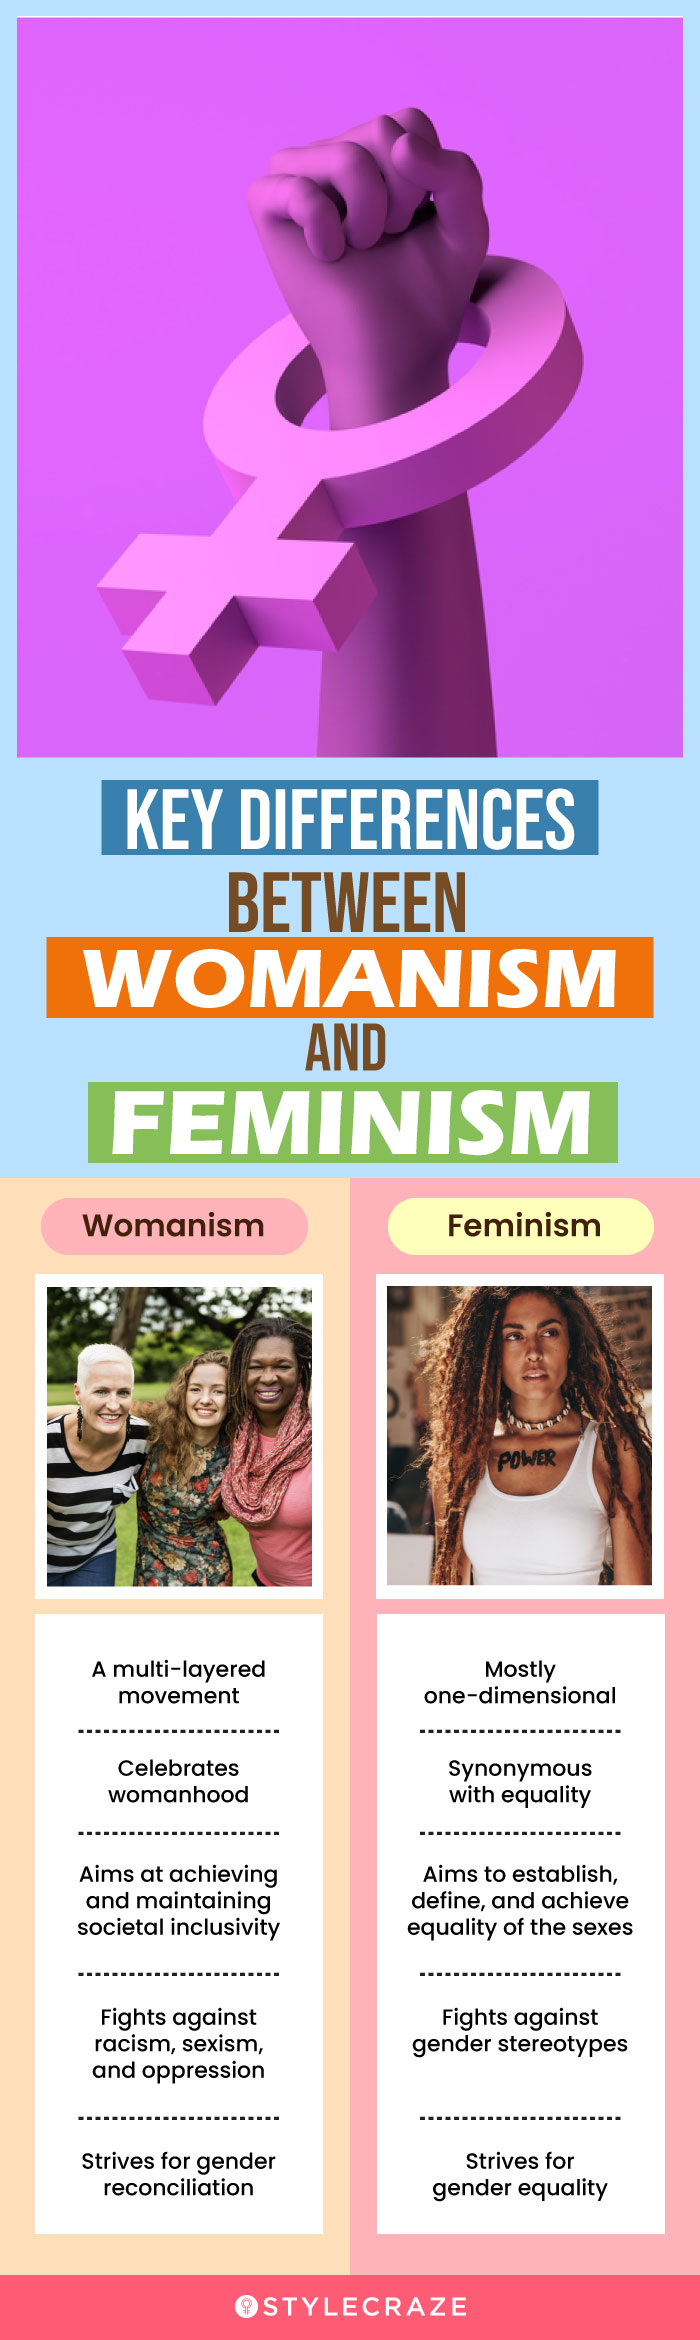 key differences between womanism and feminism (infographic)